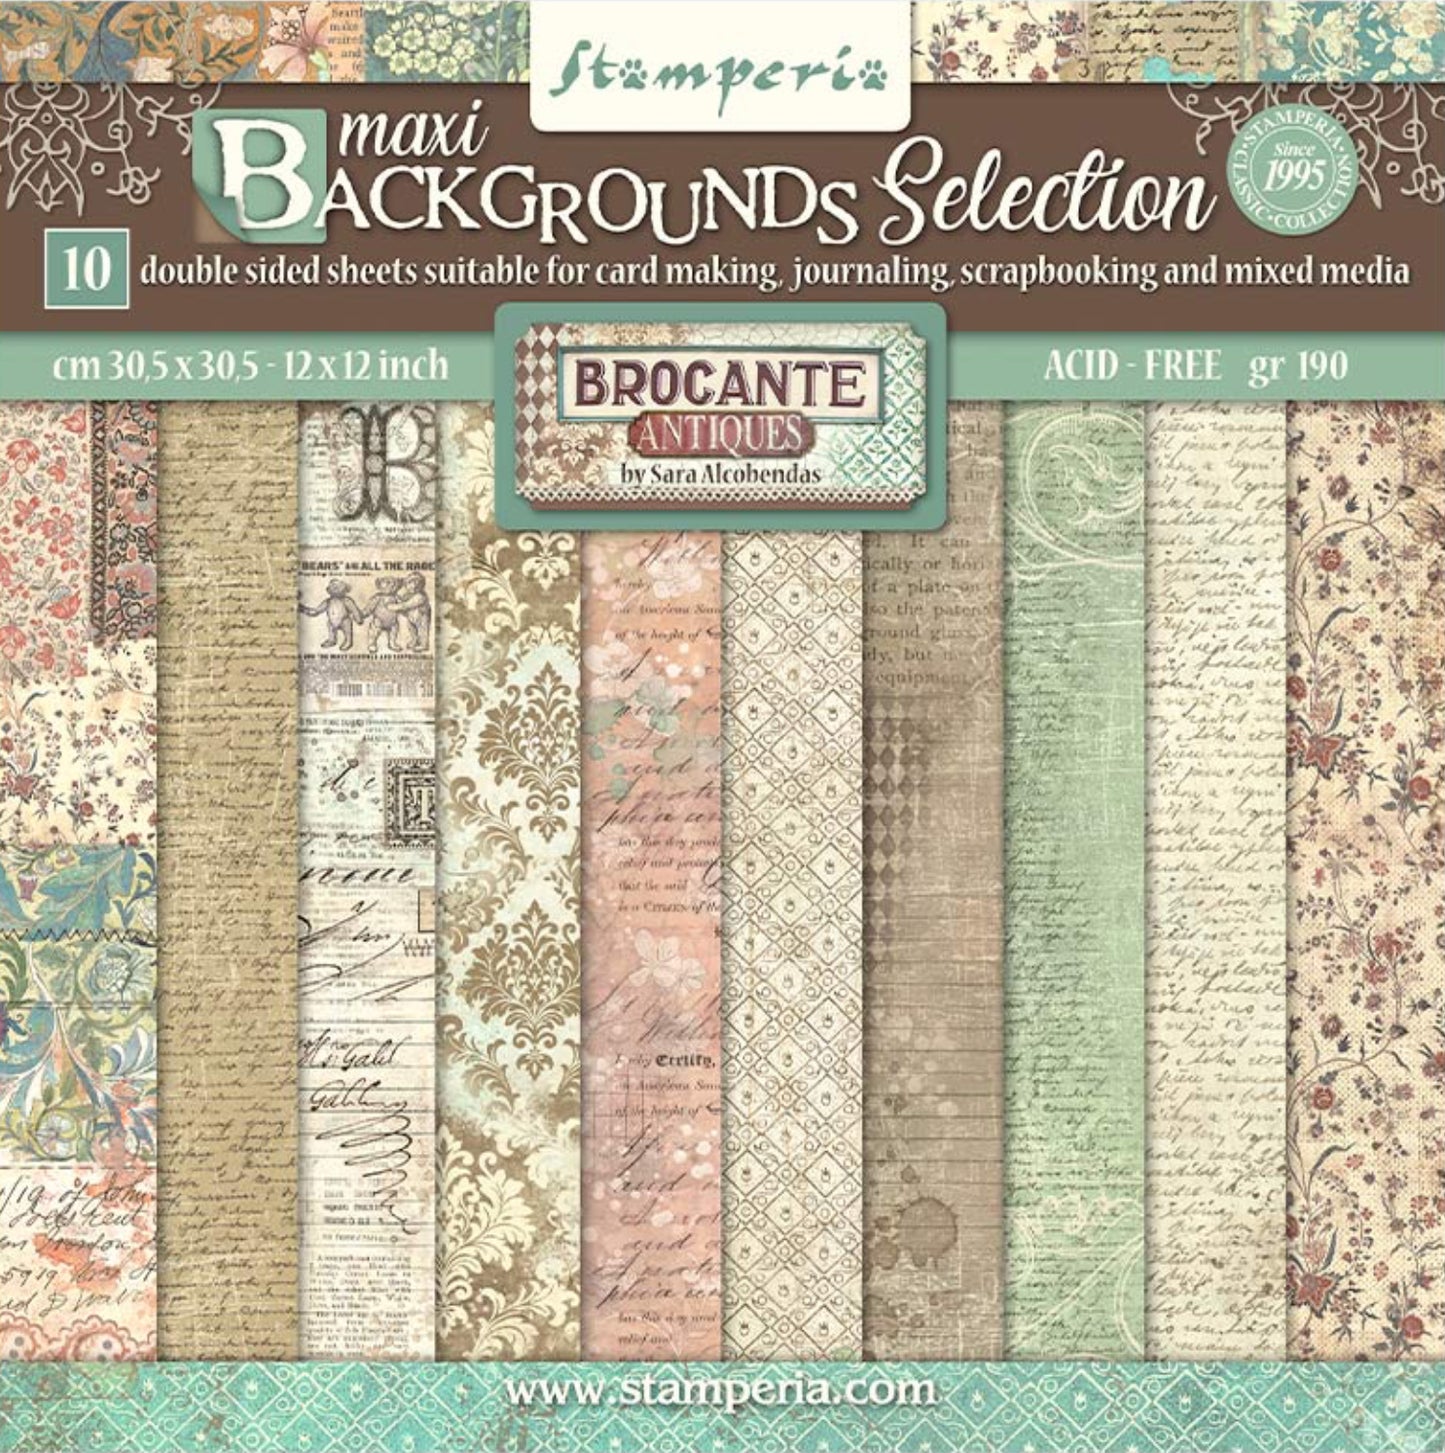 Stamperia Brocante Antiques Backgrounds 12” x 12” Paper Pad